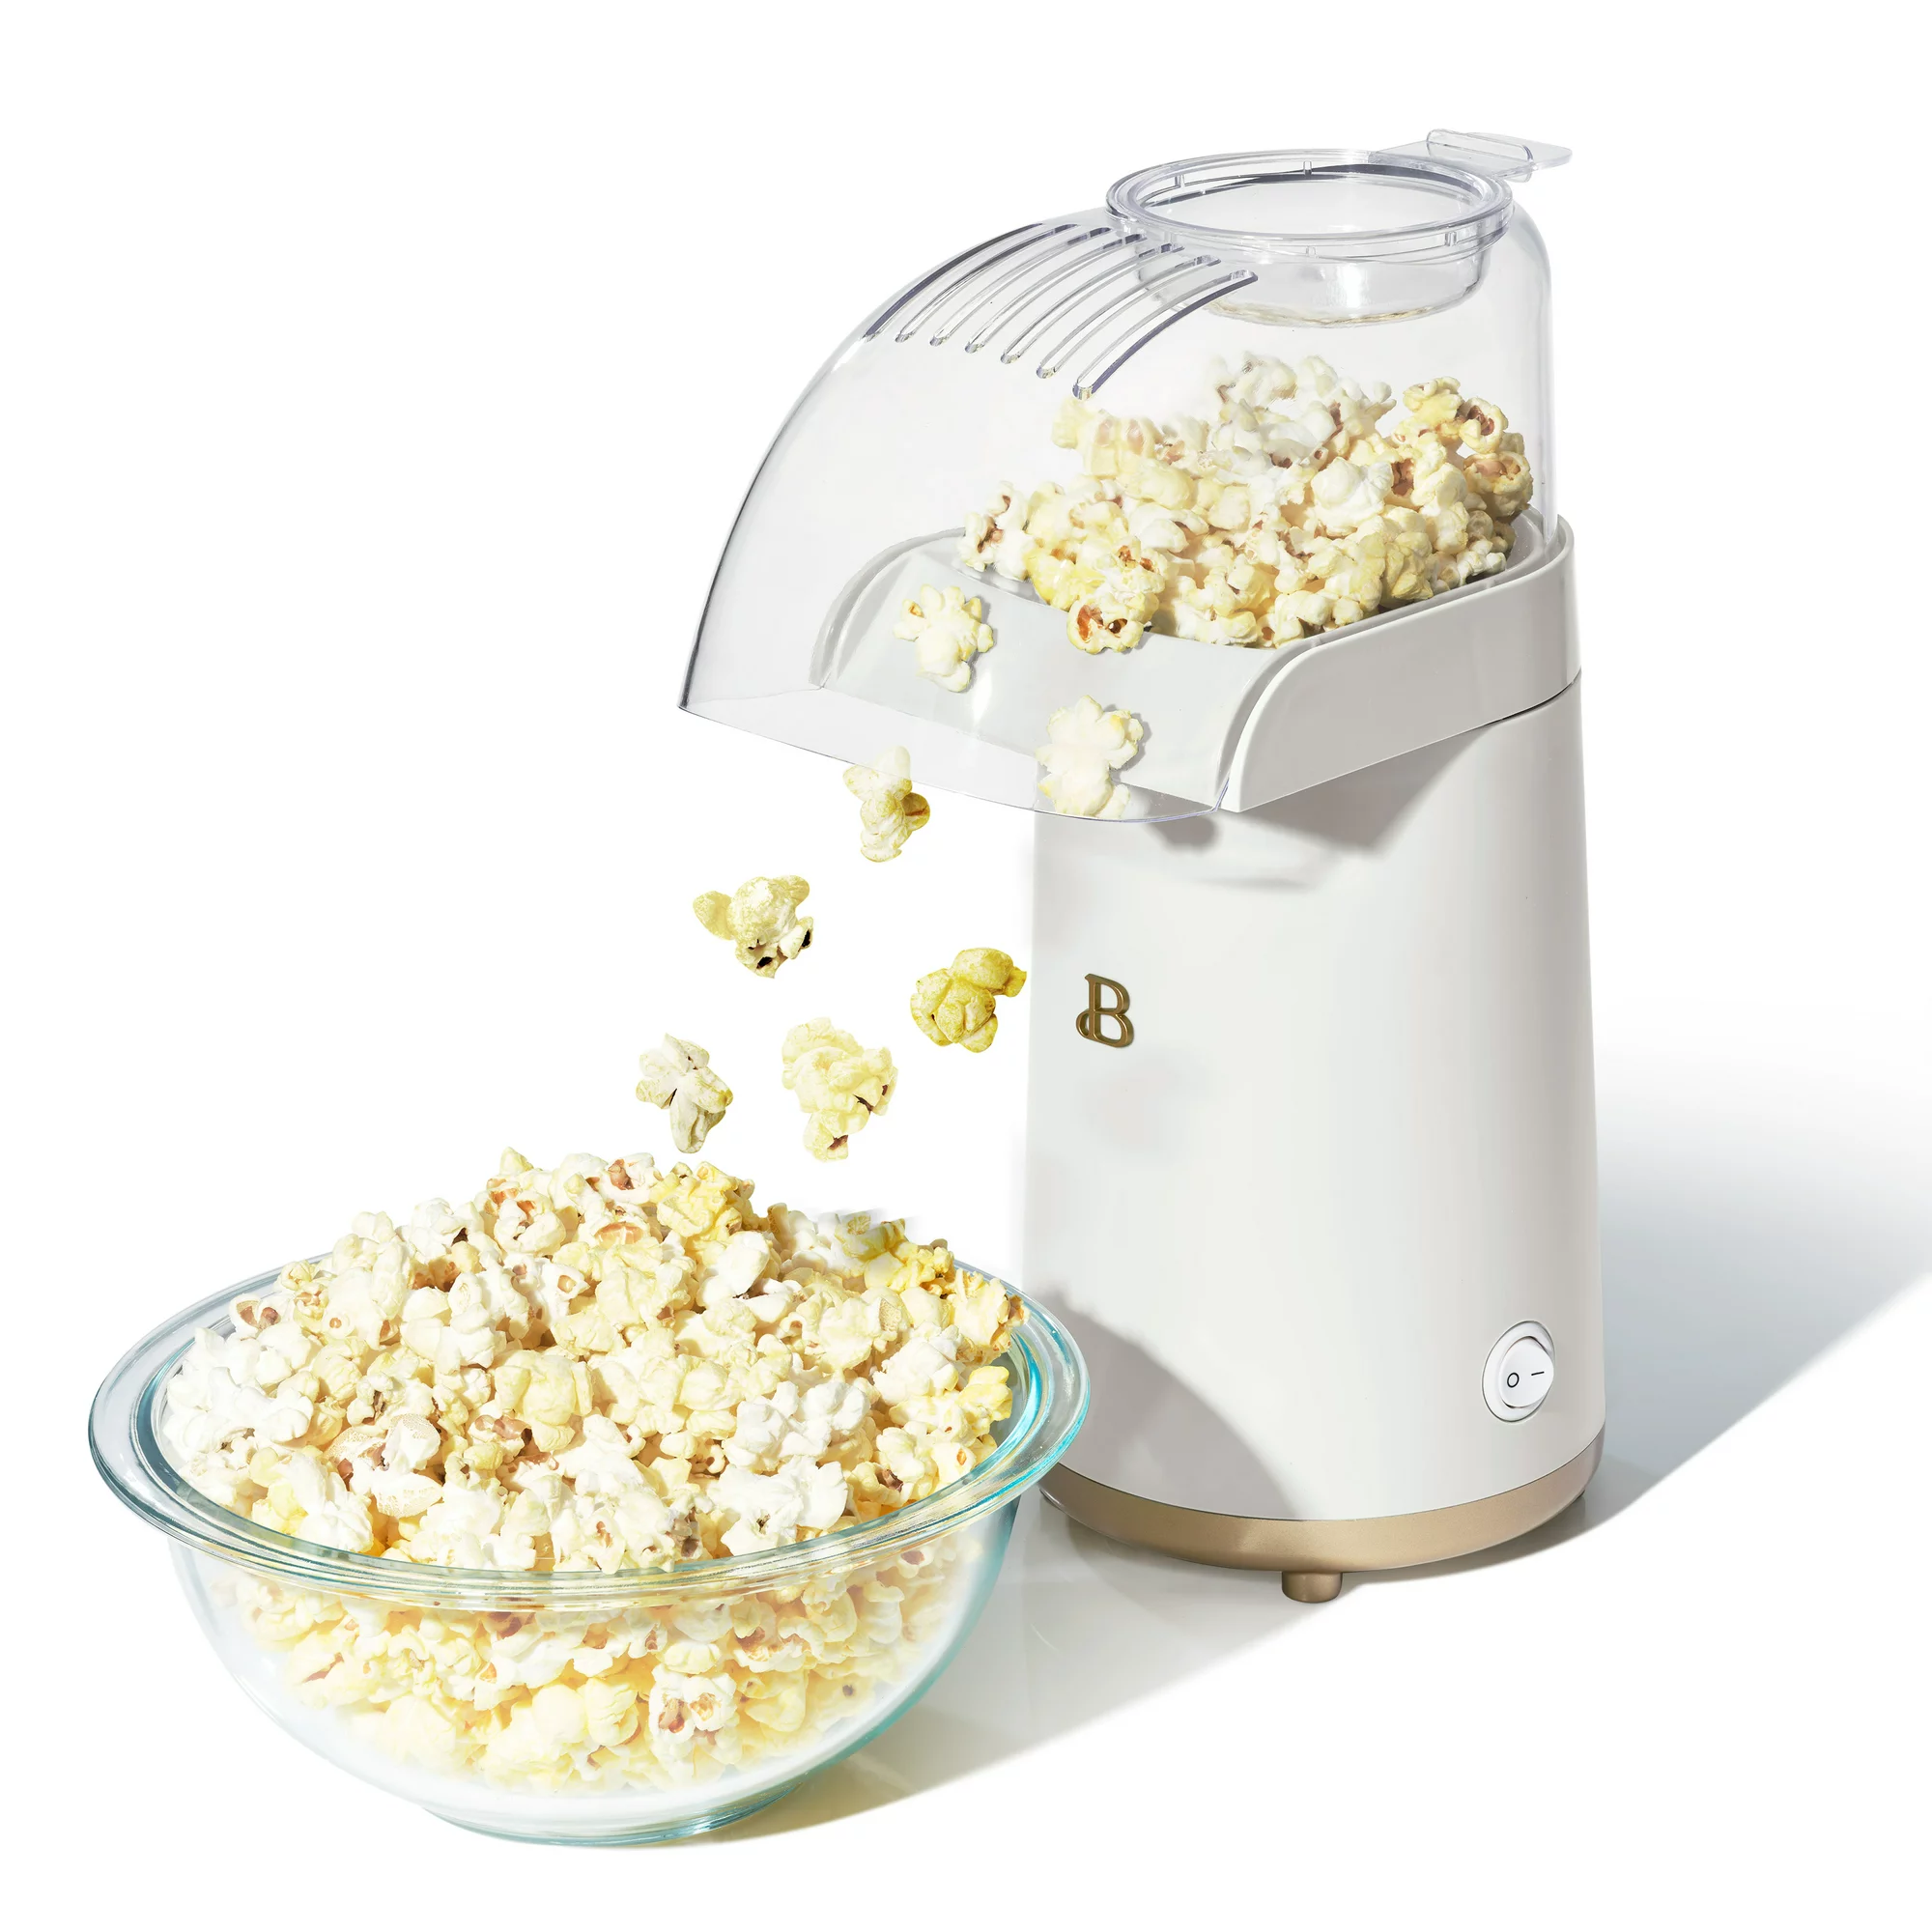 Beautiful 16 Cup Hot Air Electric Popcorn Maker, White Icing by Drew Bar... - $29.46